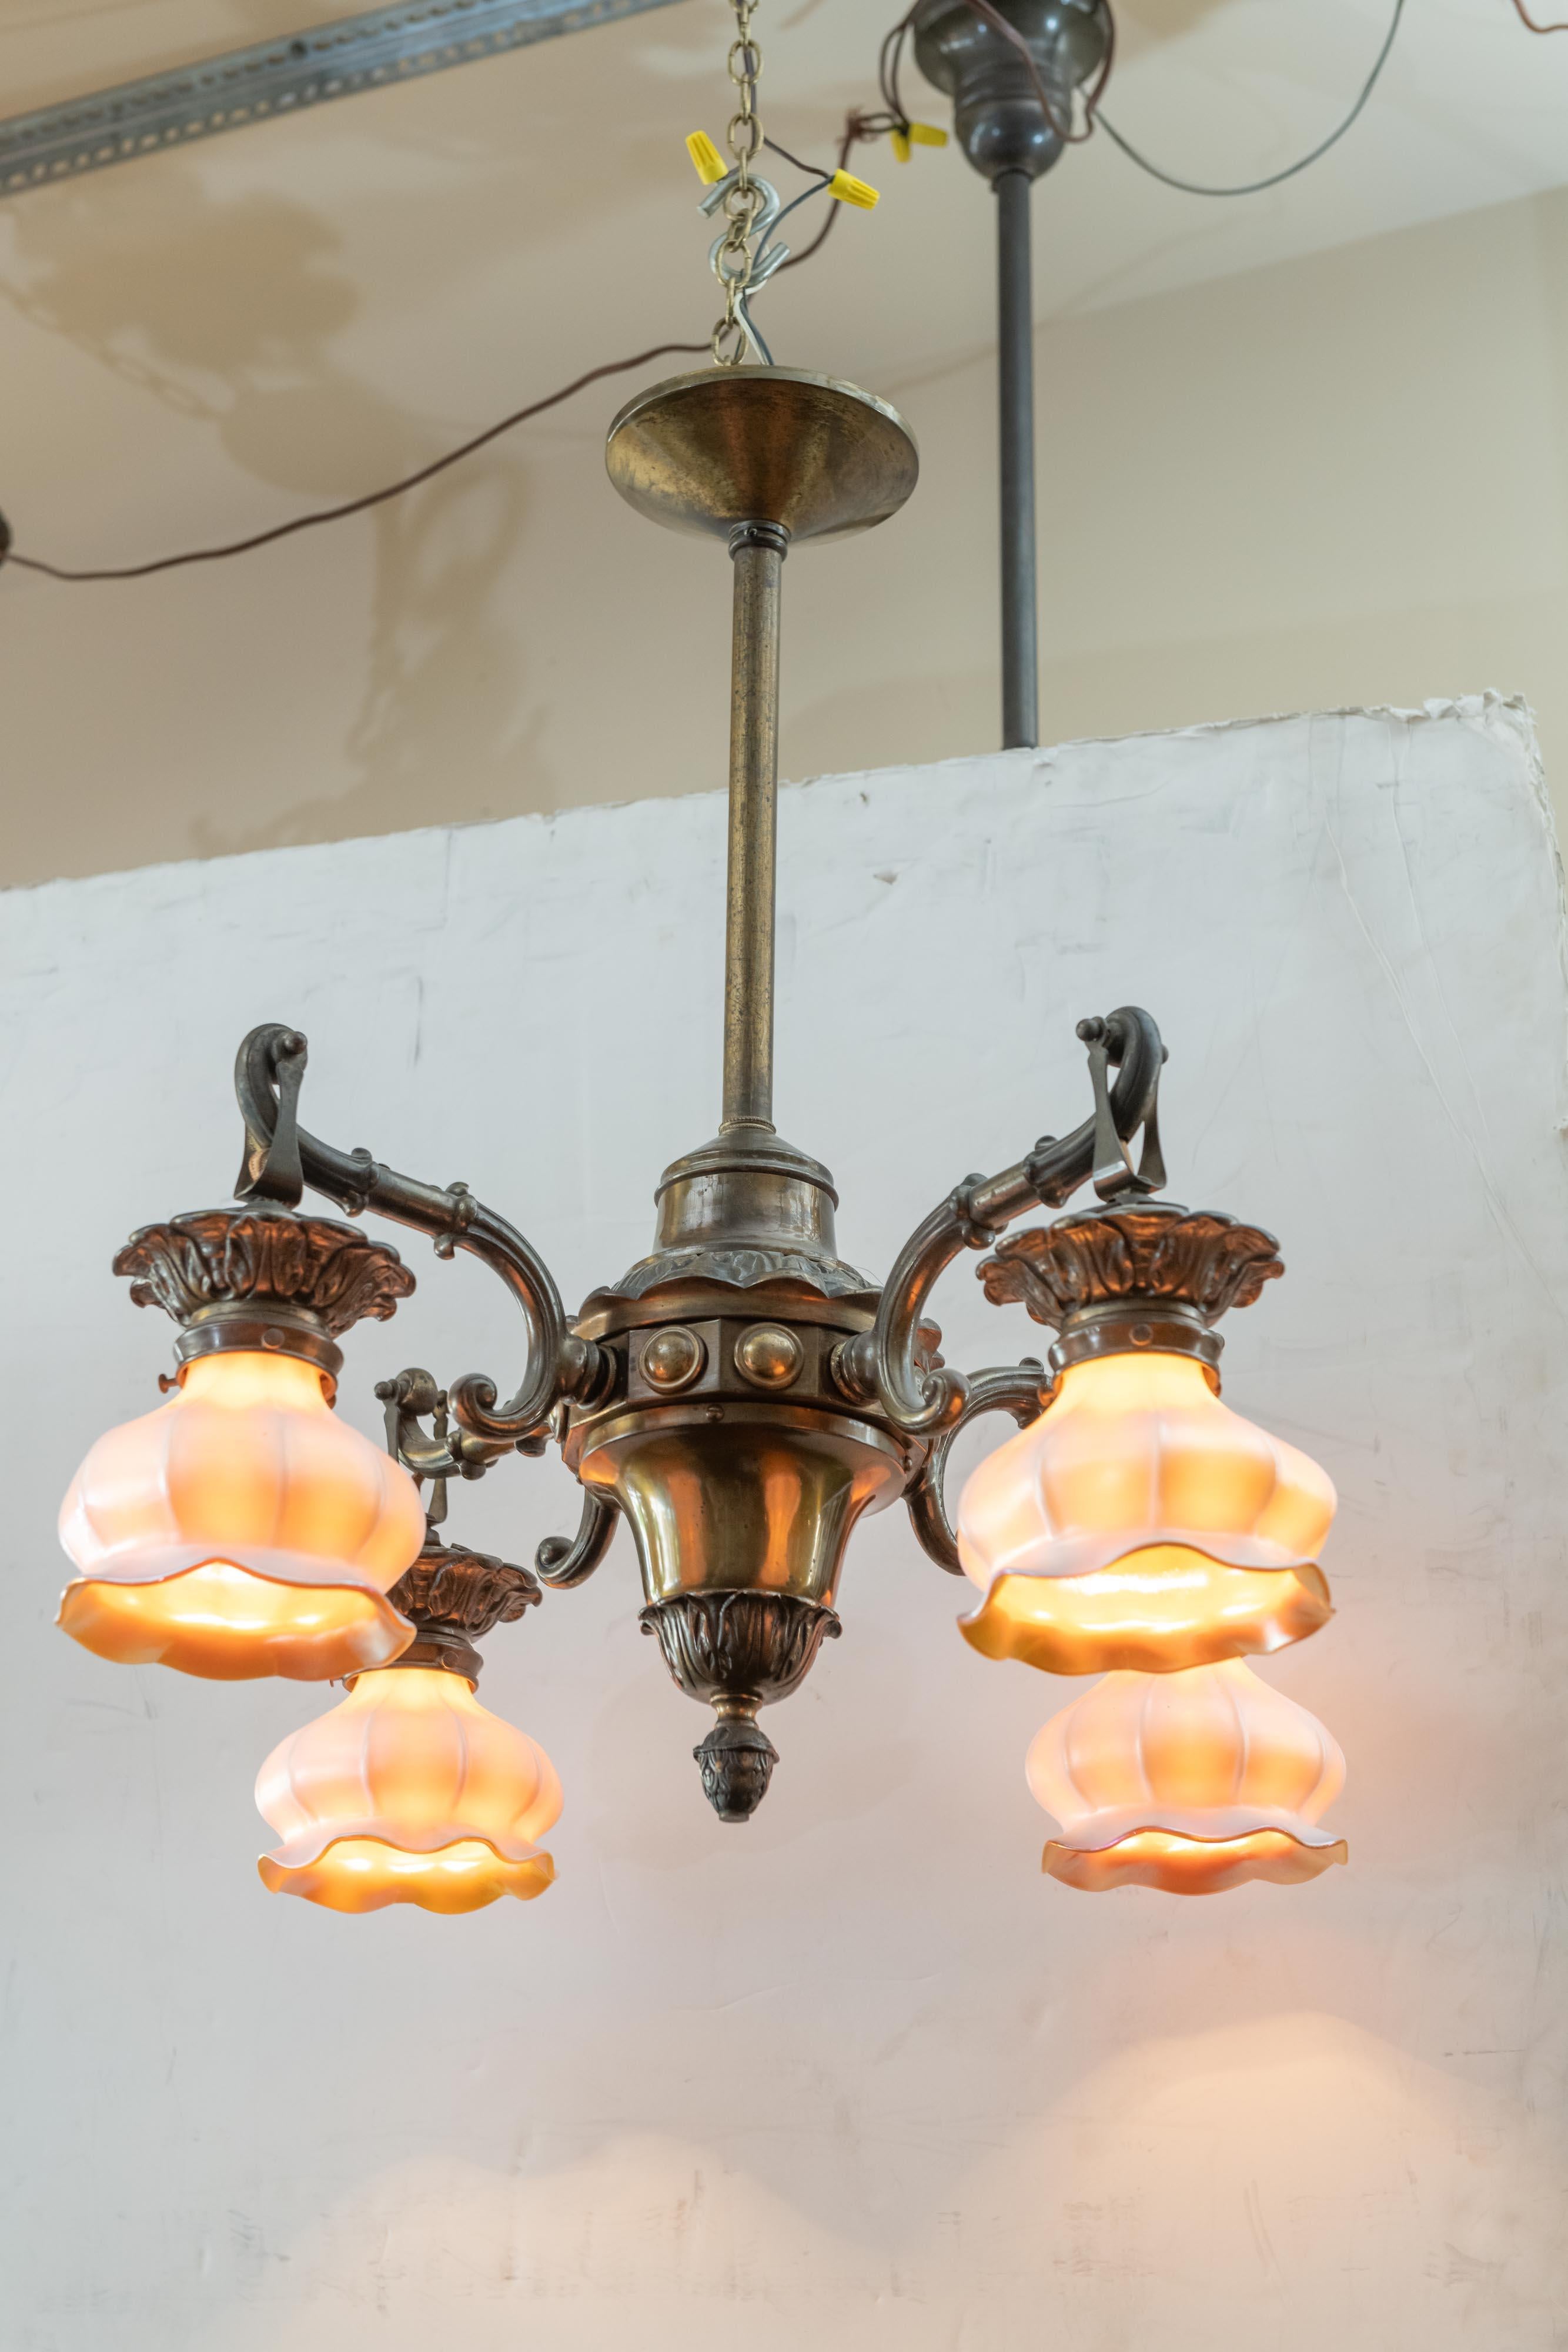 American 4-Arm Arts and Crafts Chandelier with 4 Steuben Art Glass Shades, circa 1910